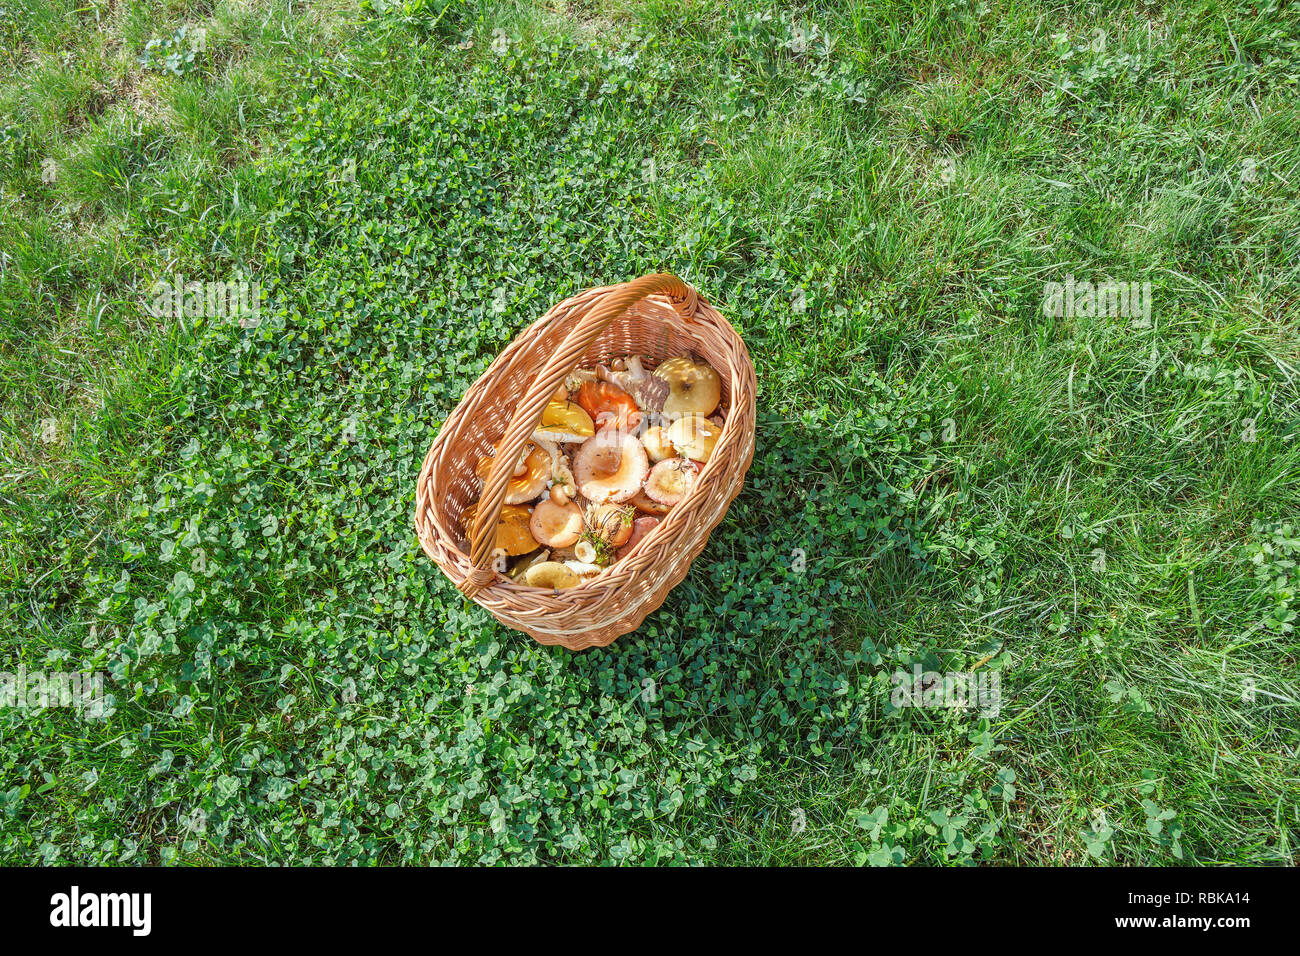 A full basket of russula on a sunny meadow Stock Photo